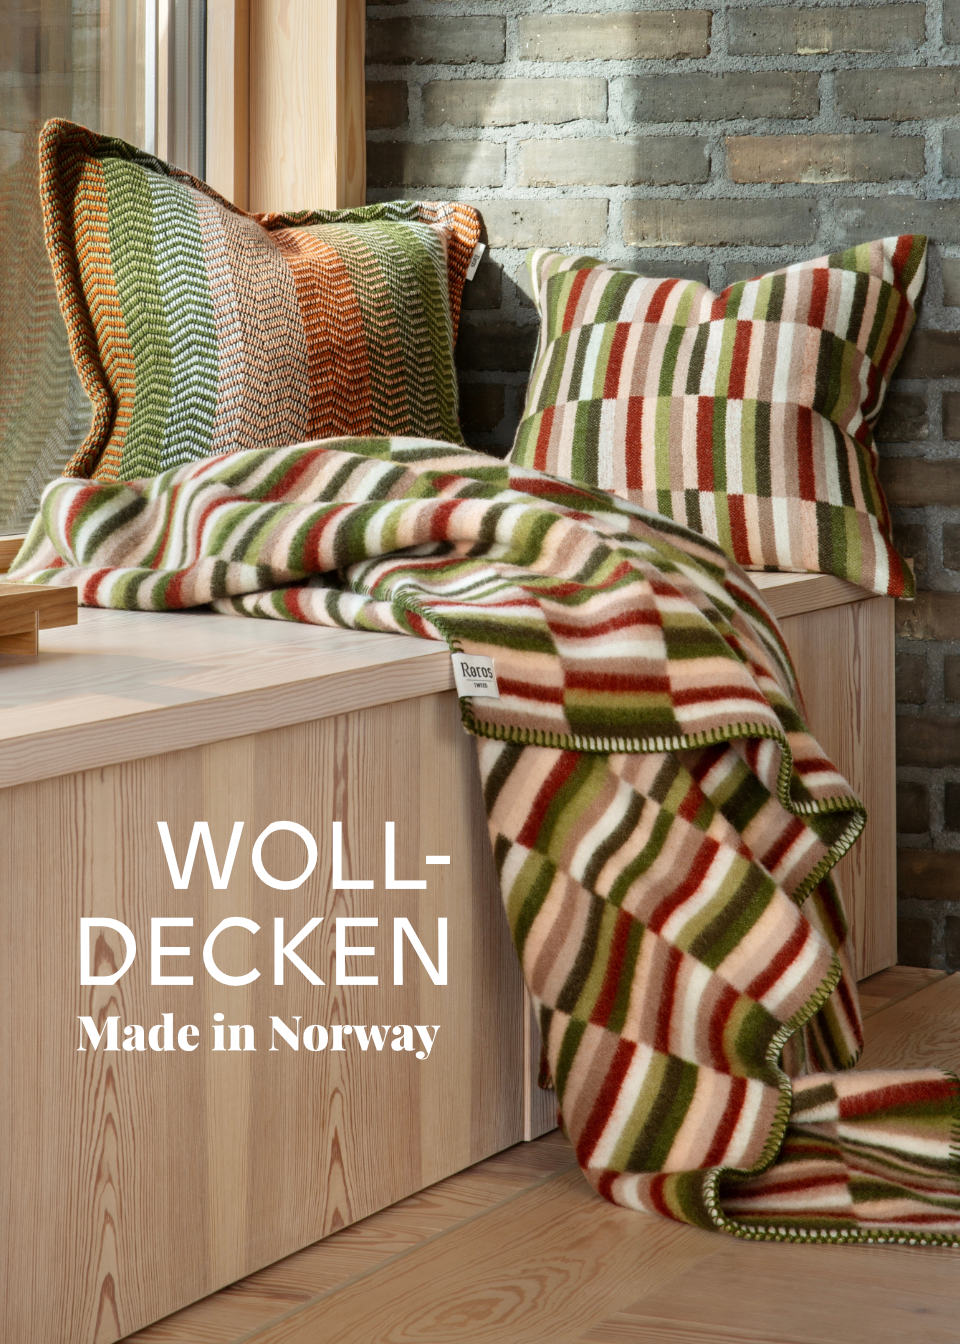 Wolldecken - Made in Norway